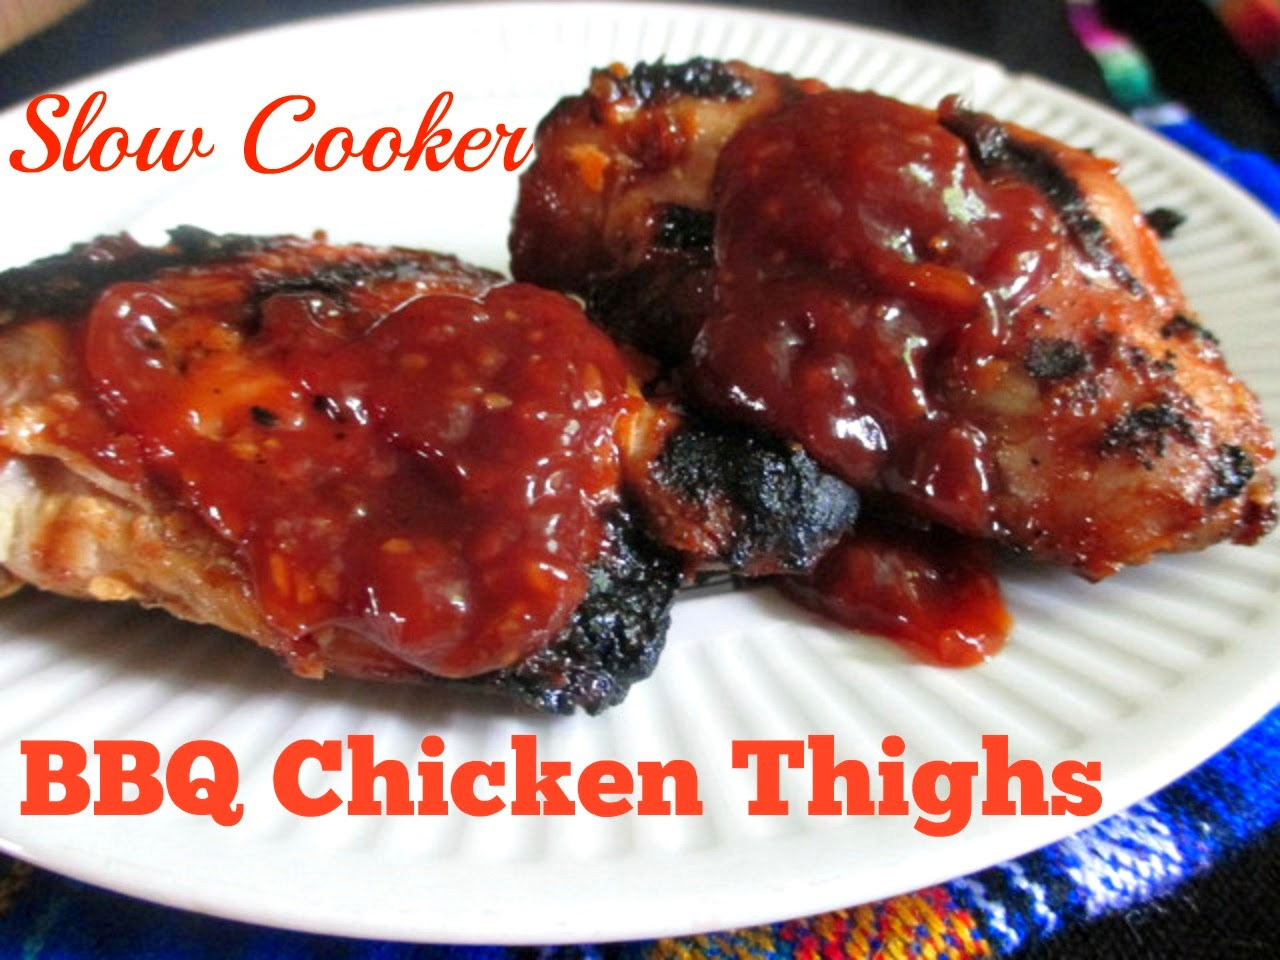 Chicken Thighs In Slow Cooker
 Just my Stuff Slow Cooker BBQ Chicken Thighs